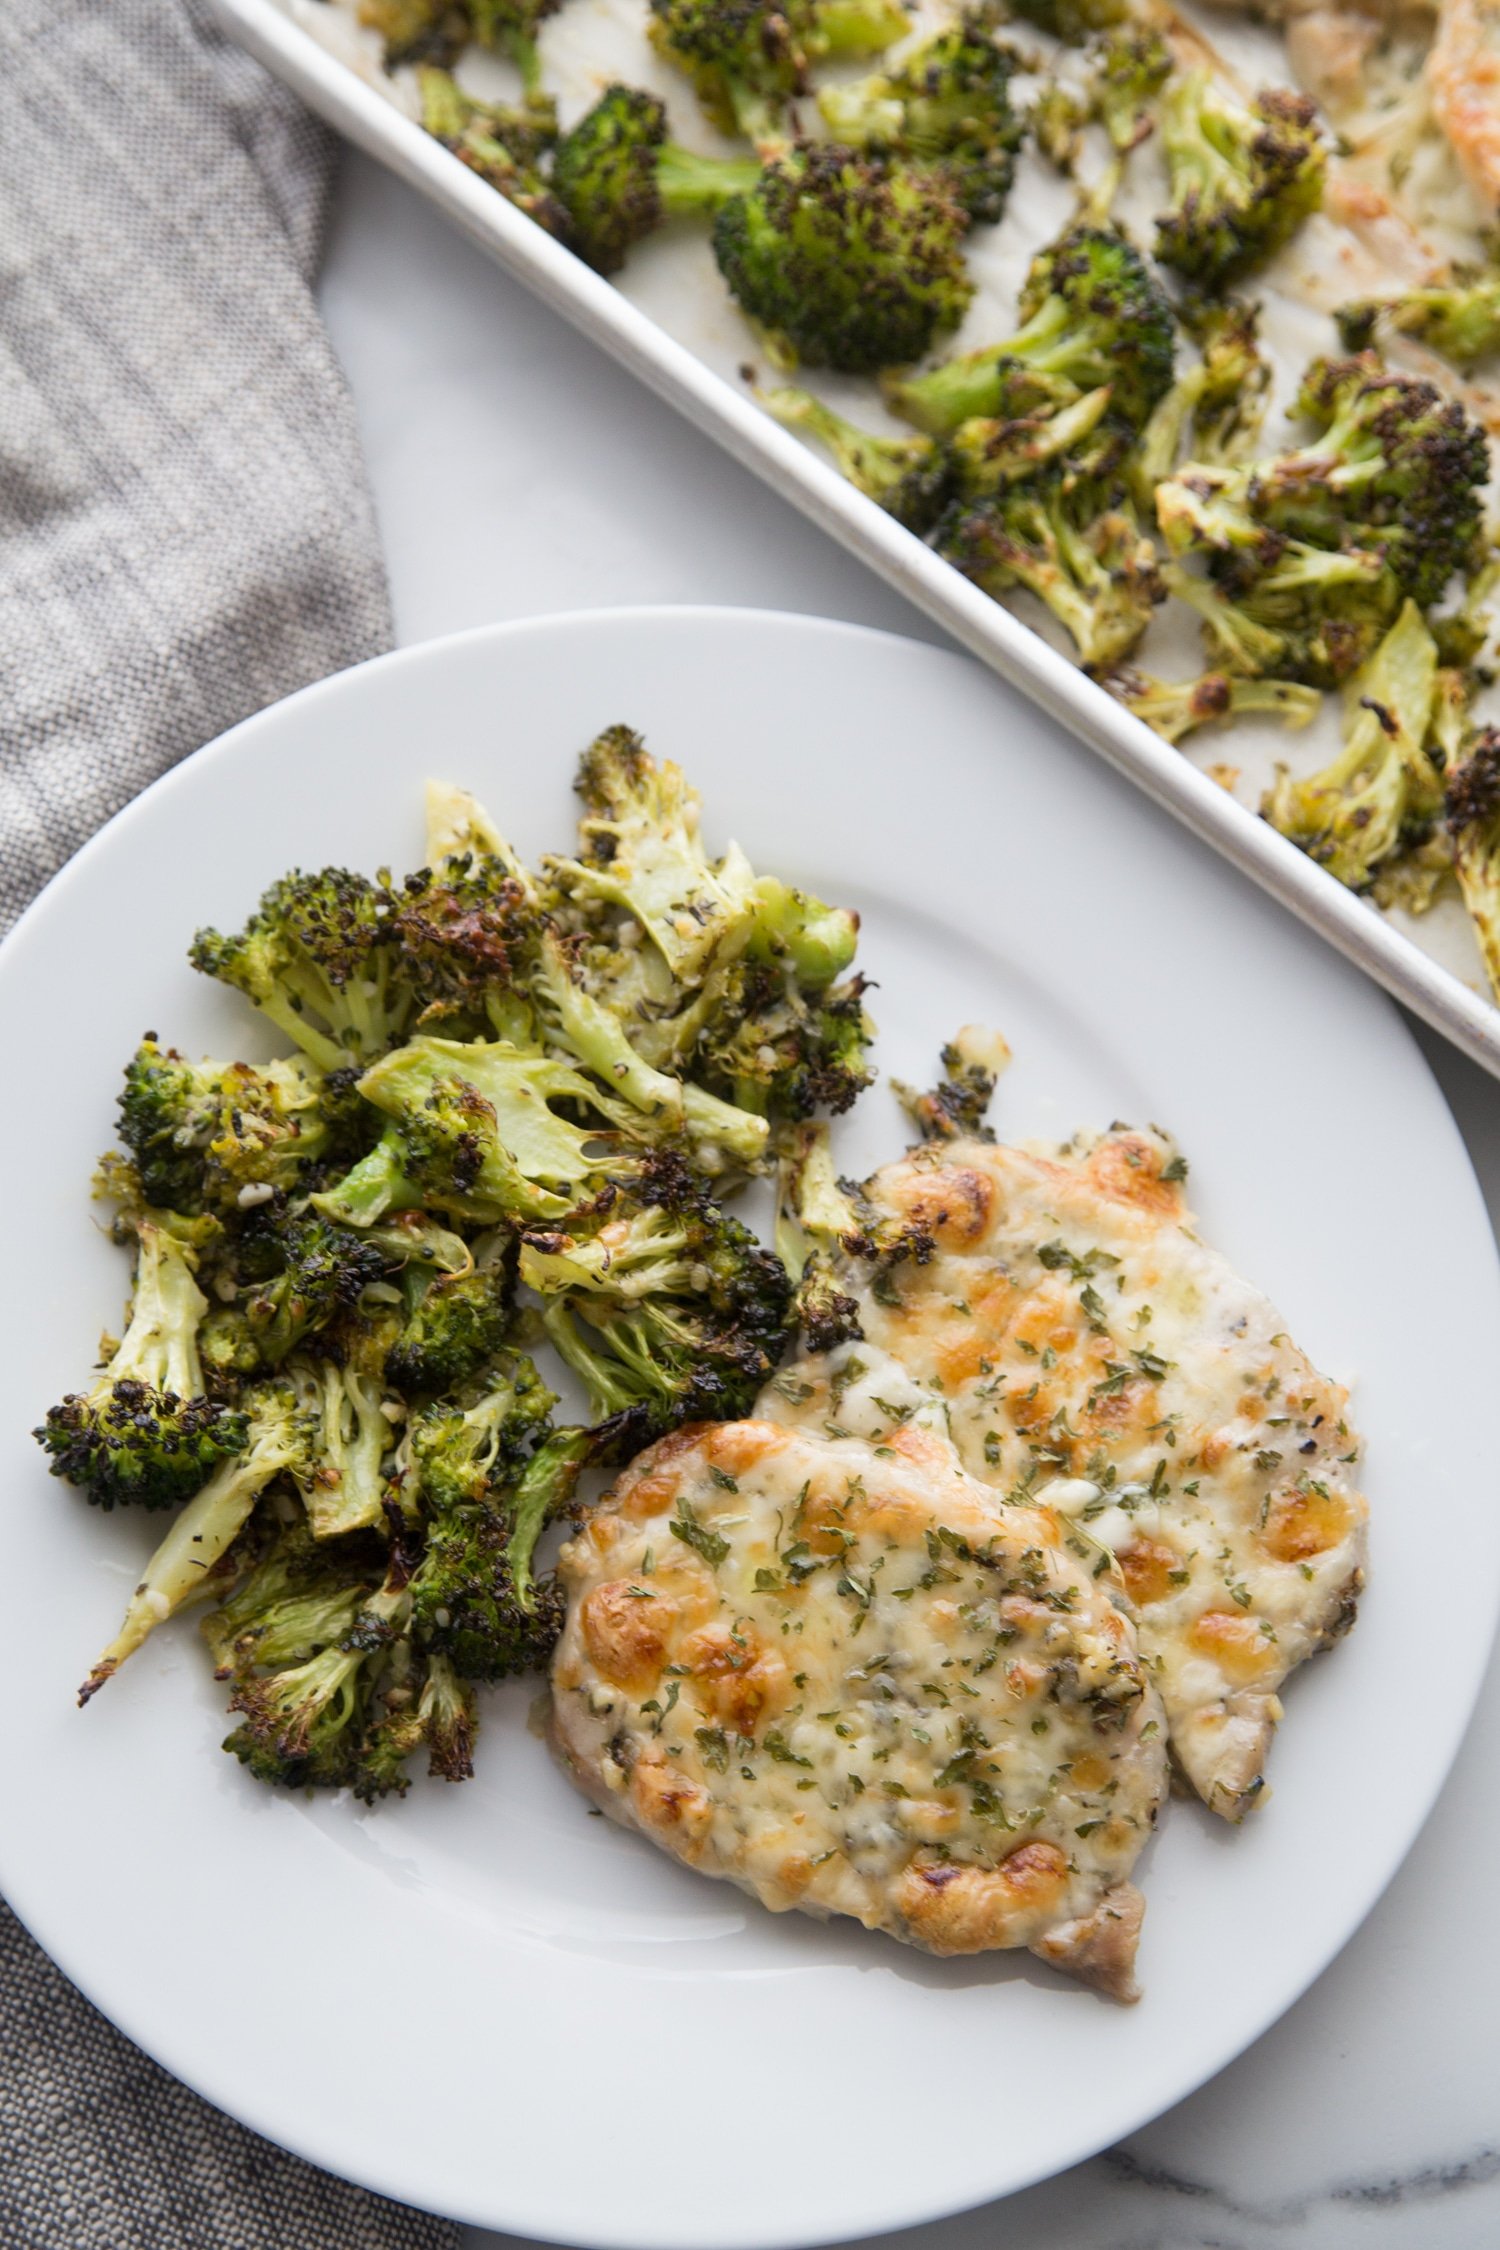 Keto Oven Baked Pork Chops Broccoli One Pan Meal Easy Kasey Trenum,How To Cook Chicken Breast In Oven